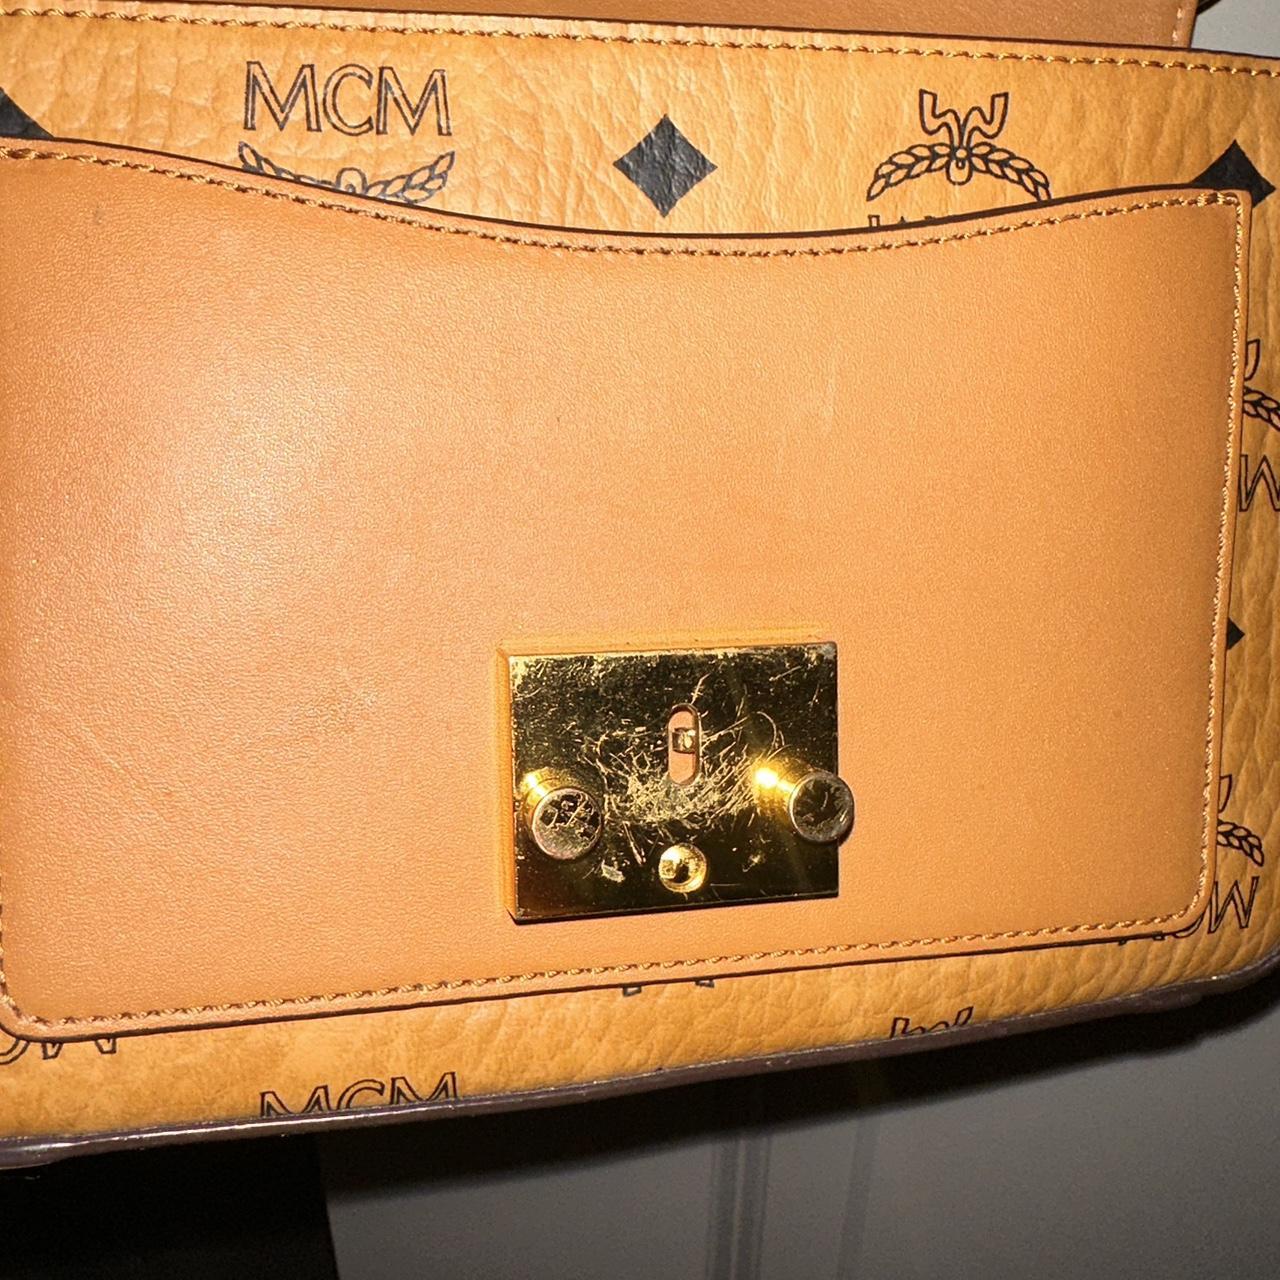 Mcm side bag #MCM Contact me for any questions. - Depop